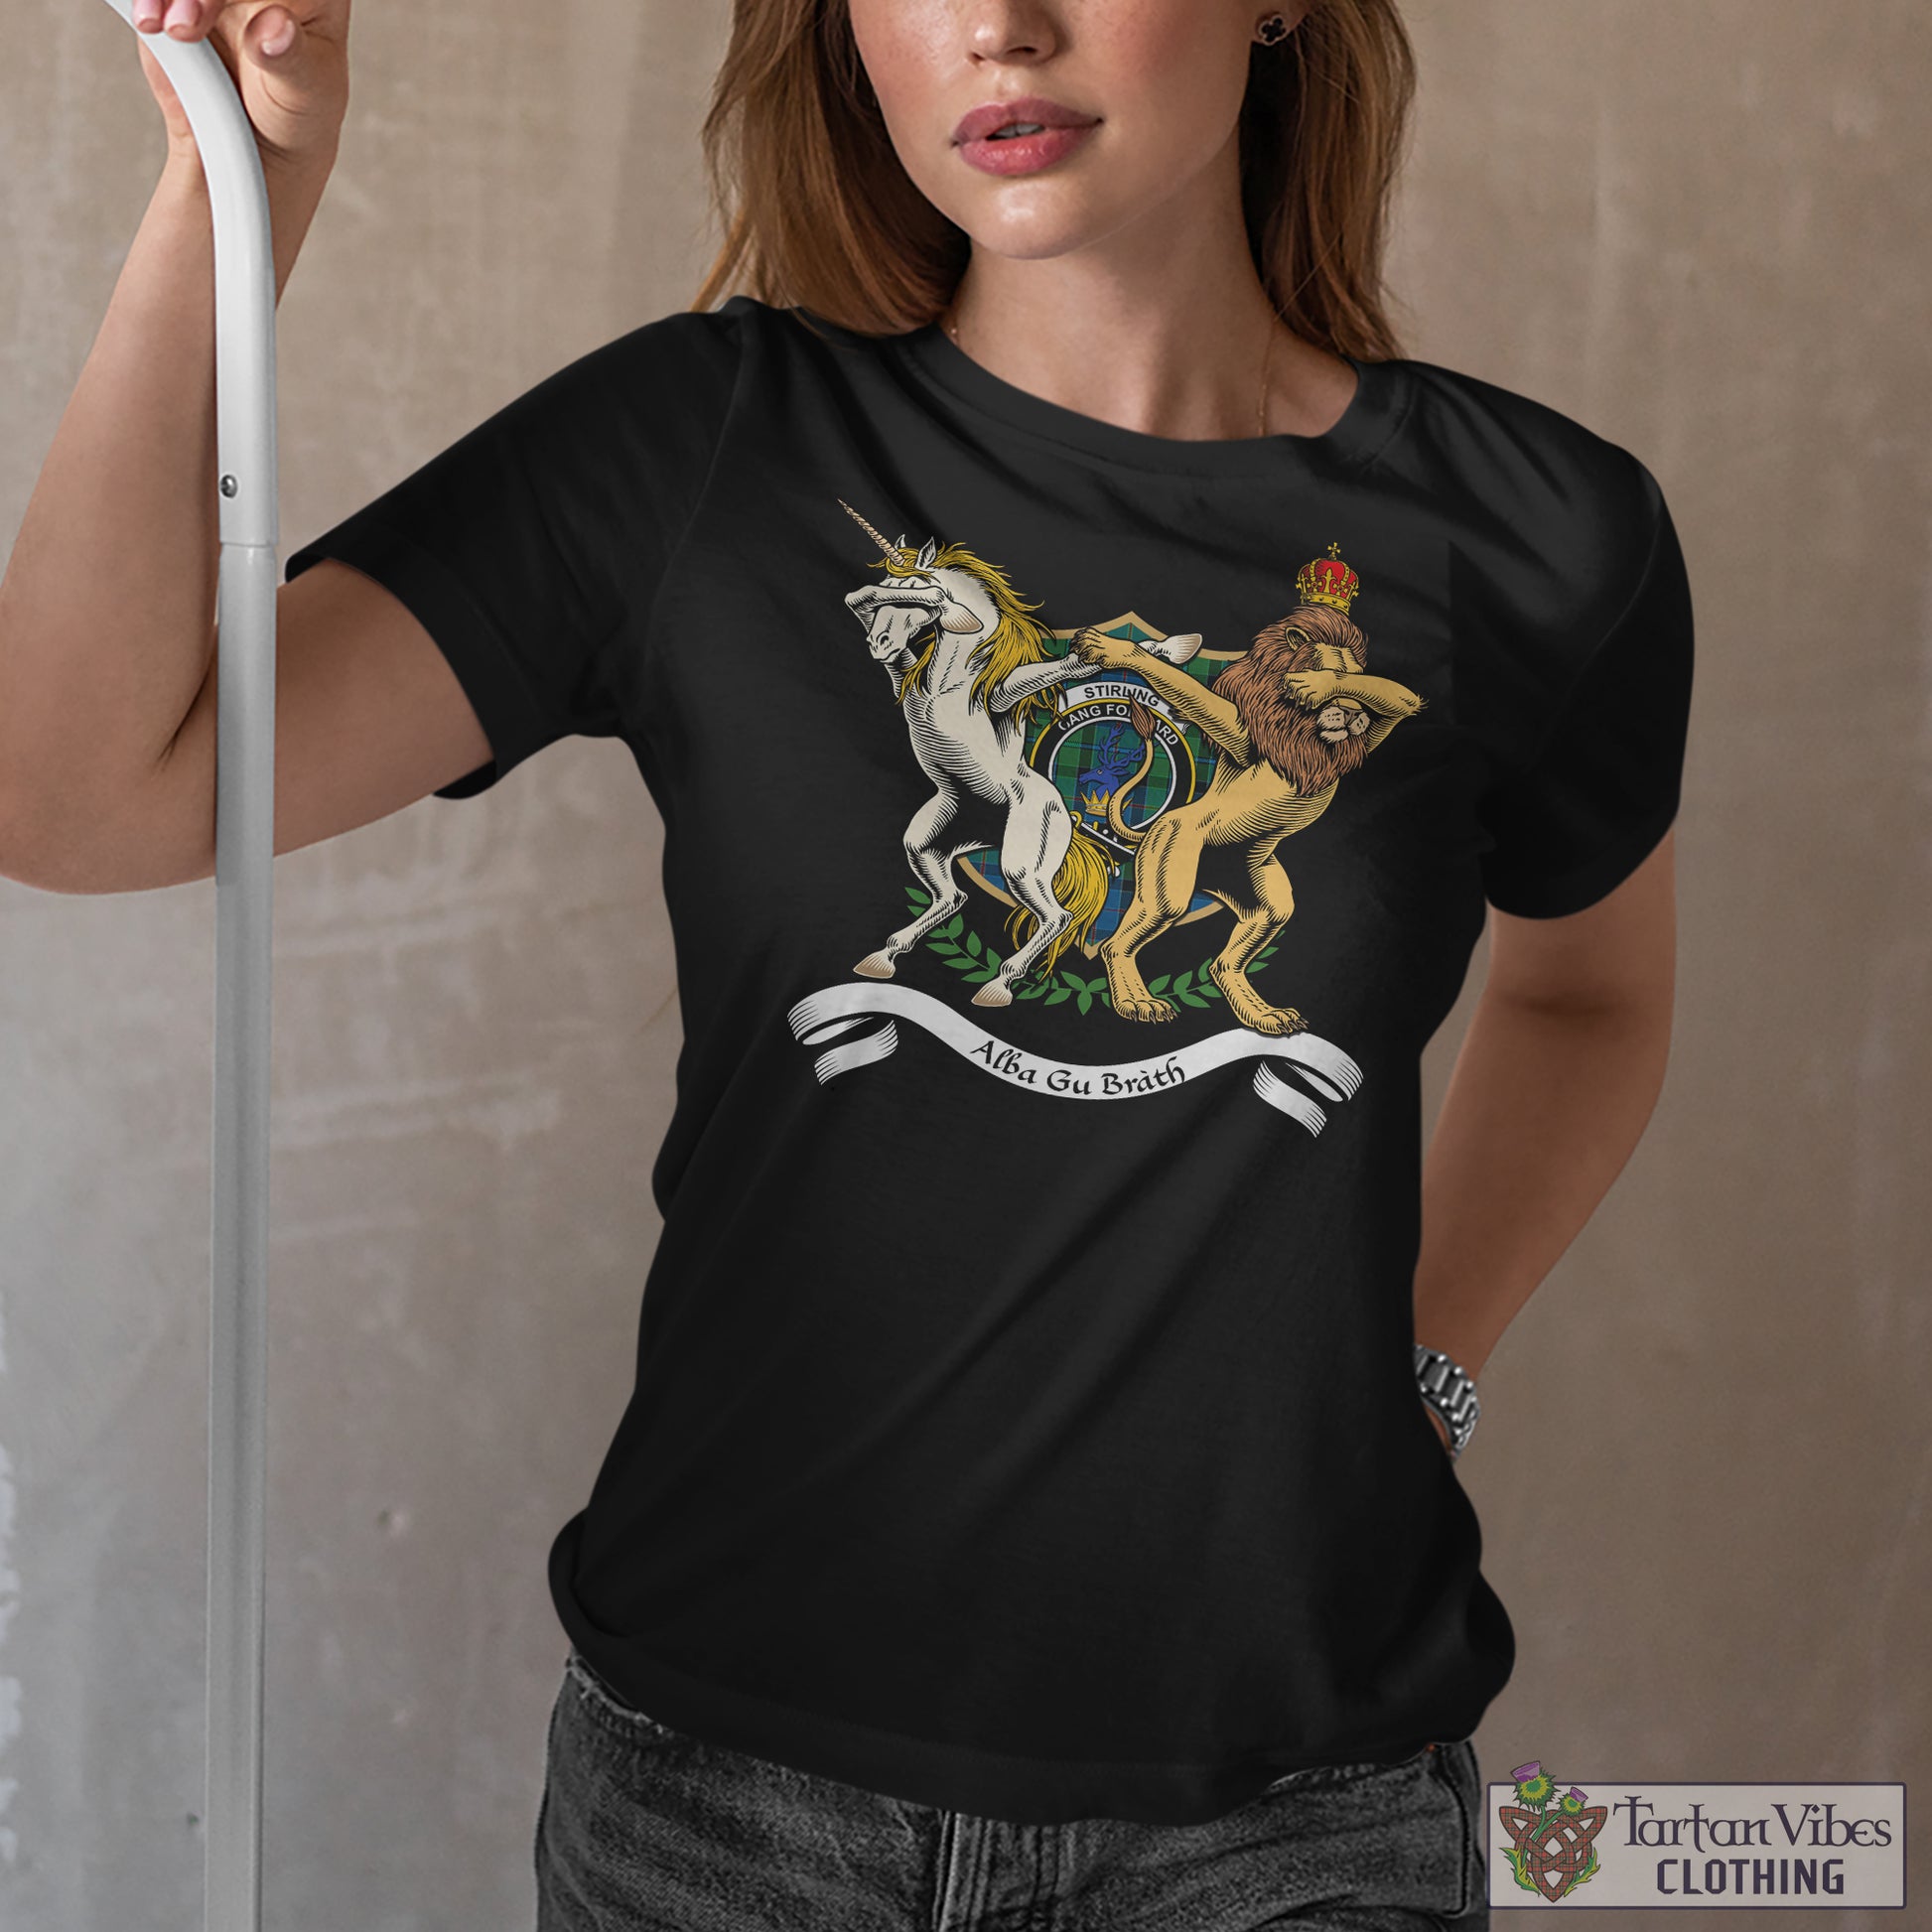 Tartan Vibes Clothing Stirling Family Crest Cotton Women's T-Shirt with Scotland Royal Coat Of Arm Funny Style